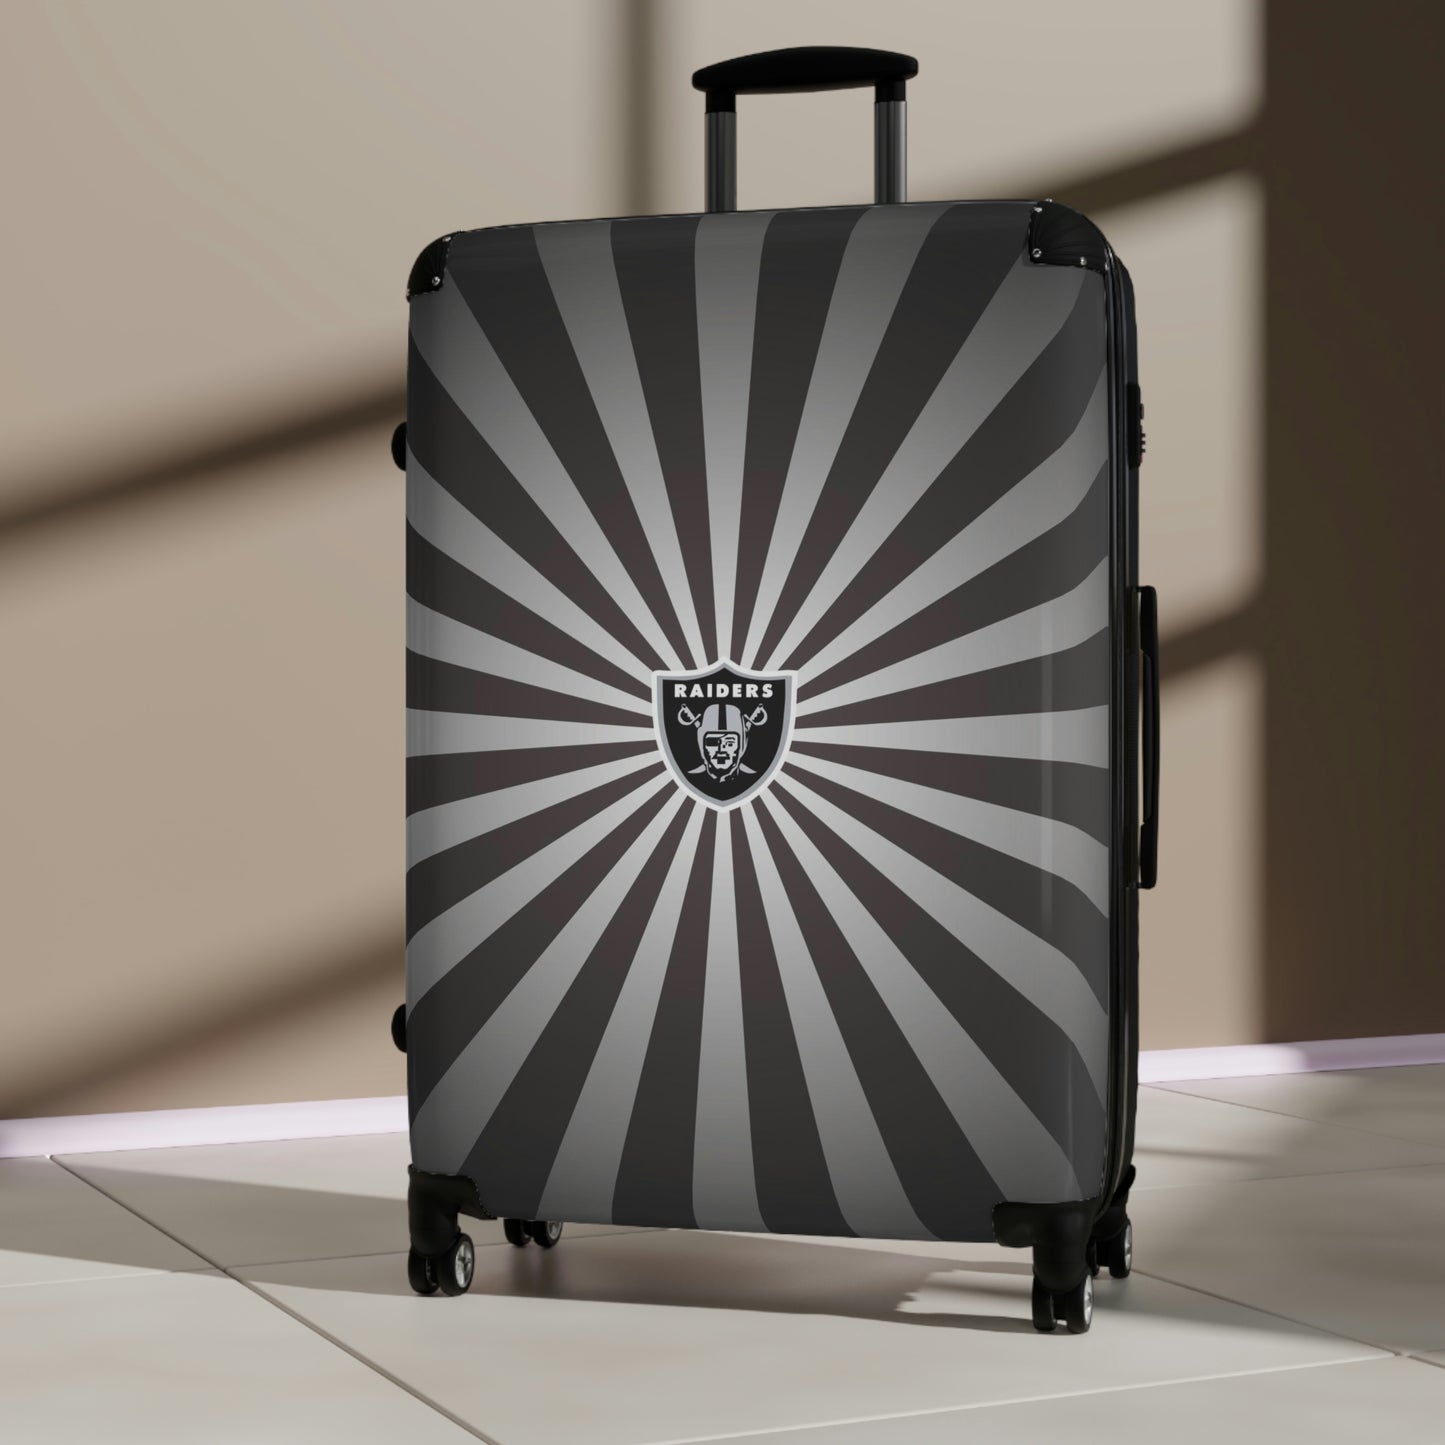 Geotrot Las Vegas Raiders National Football League NFL Team Logo Cabin Suitcase Rolling Luggage Checking Bag